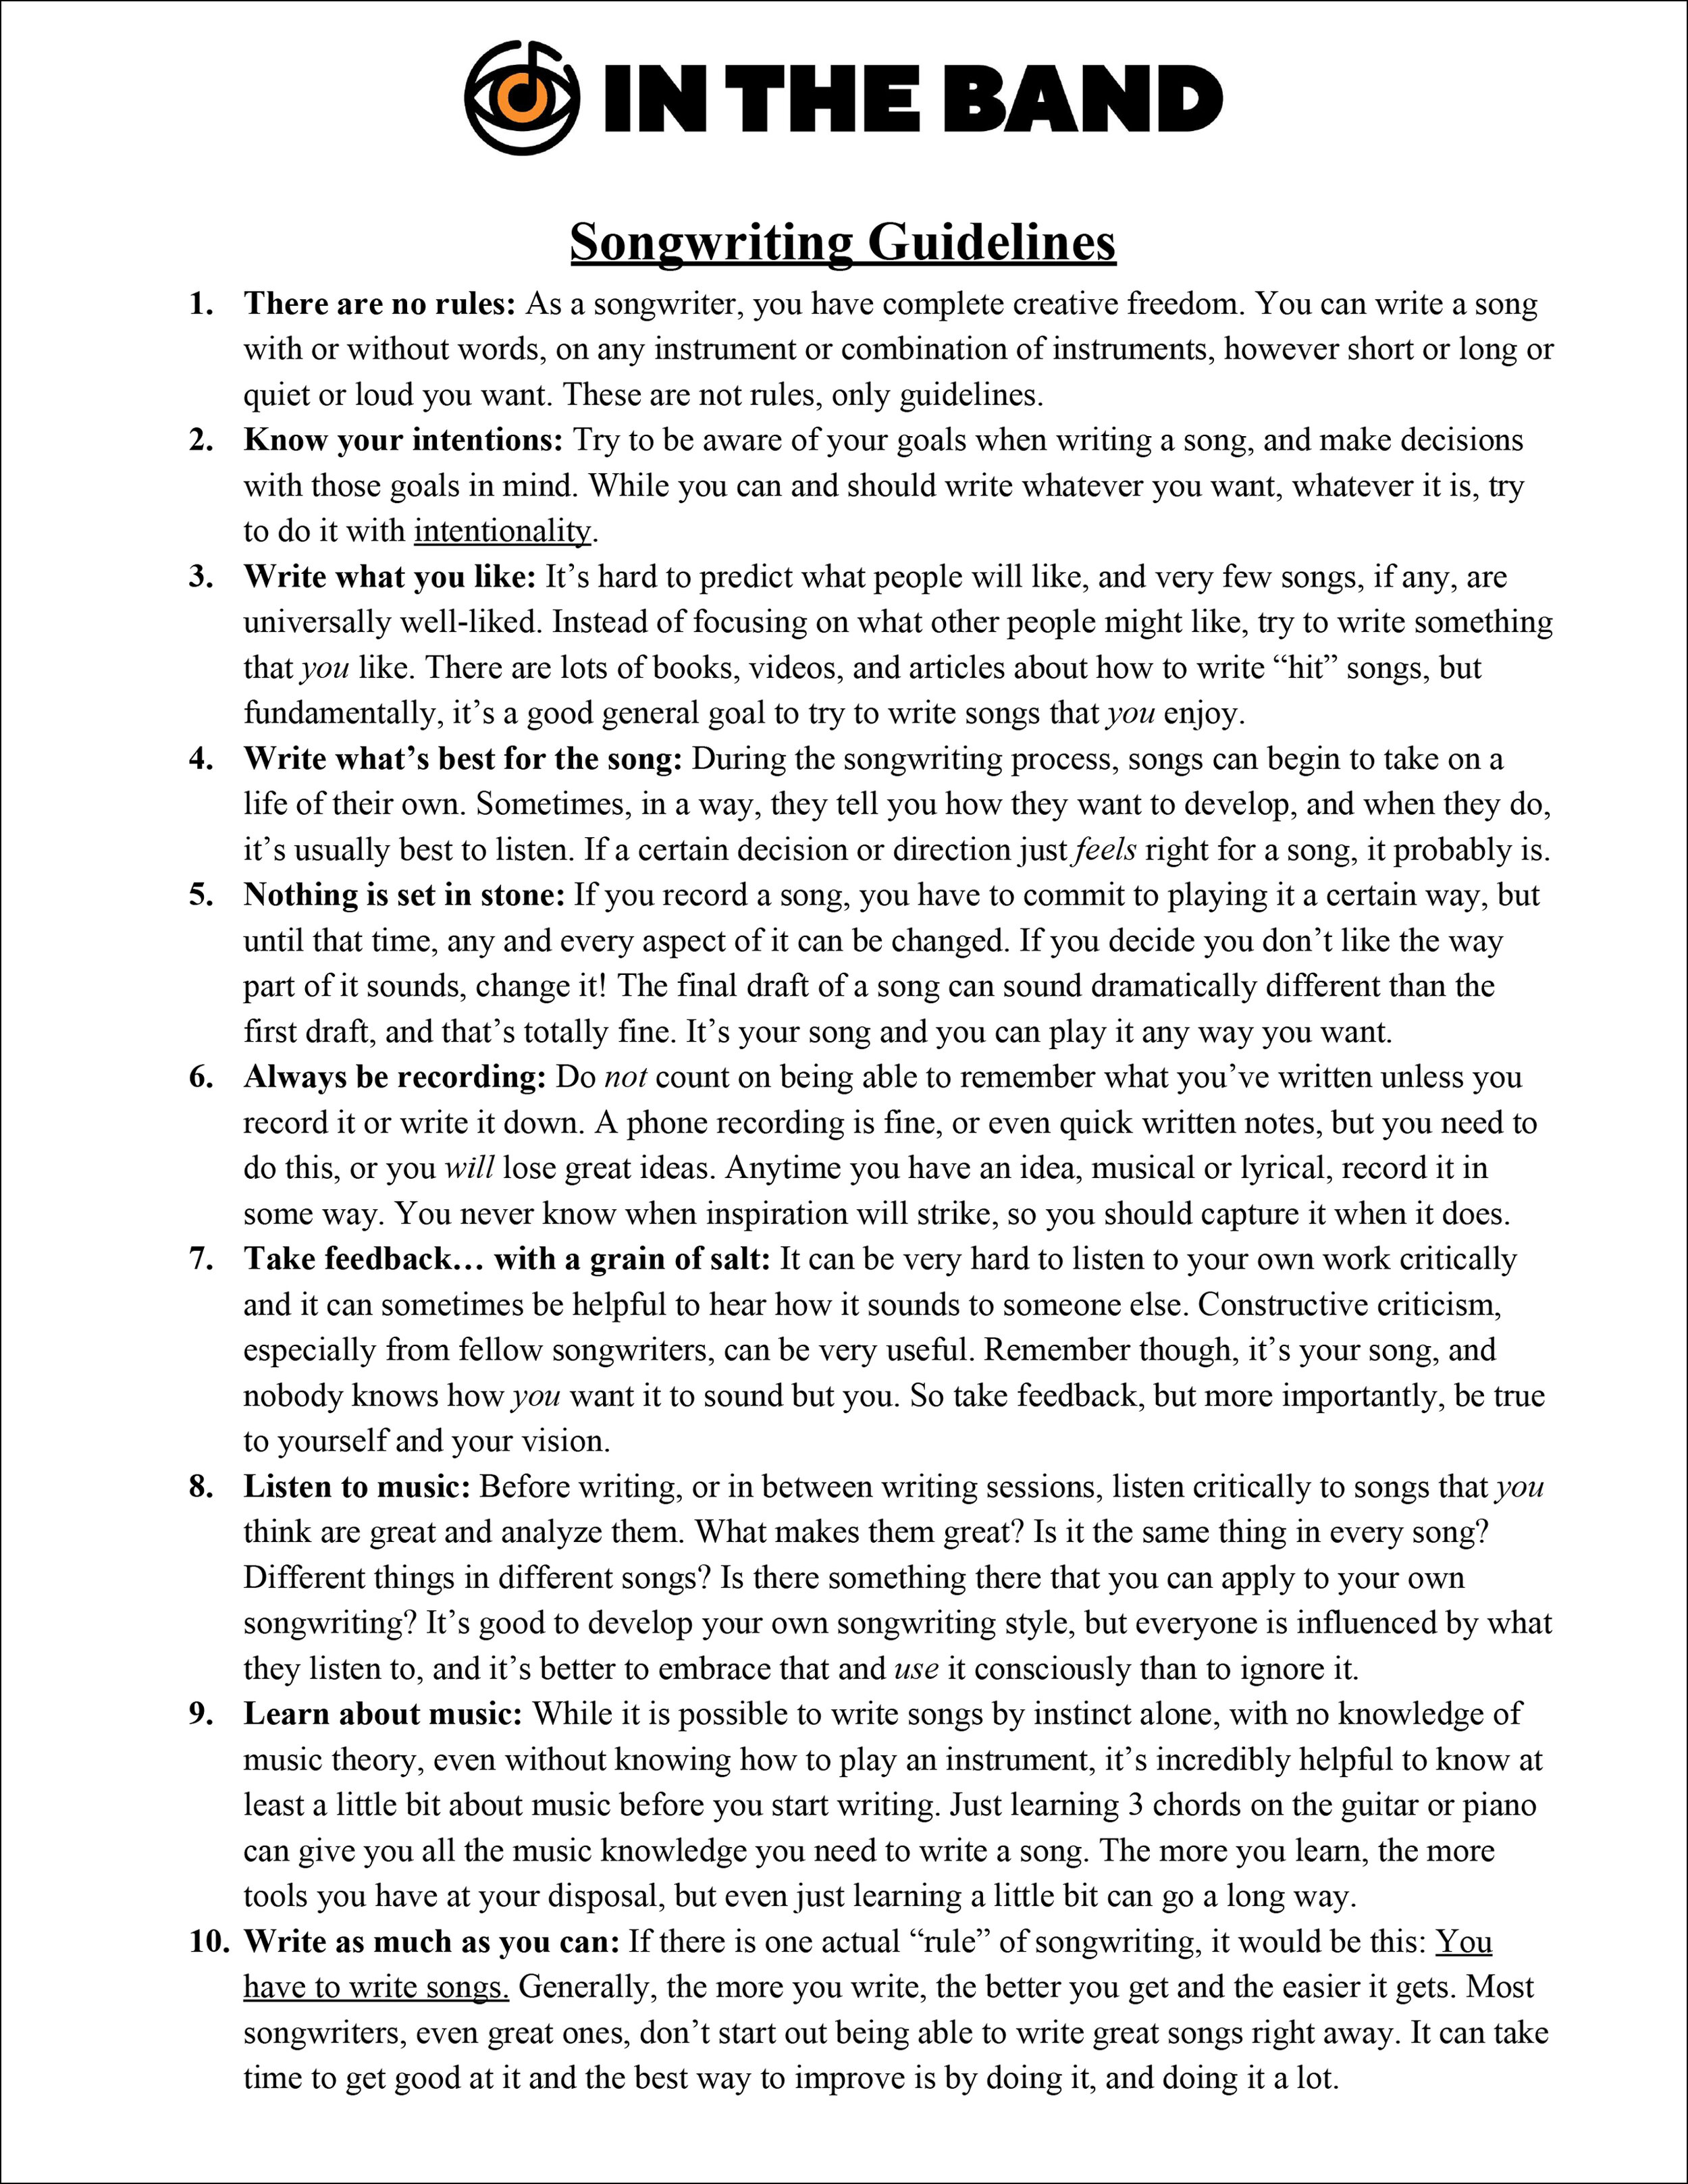 10 Songwriting Guidelines